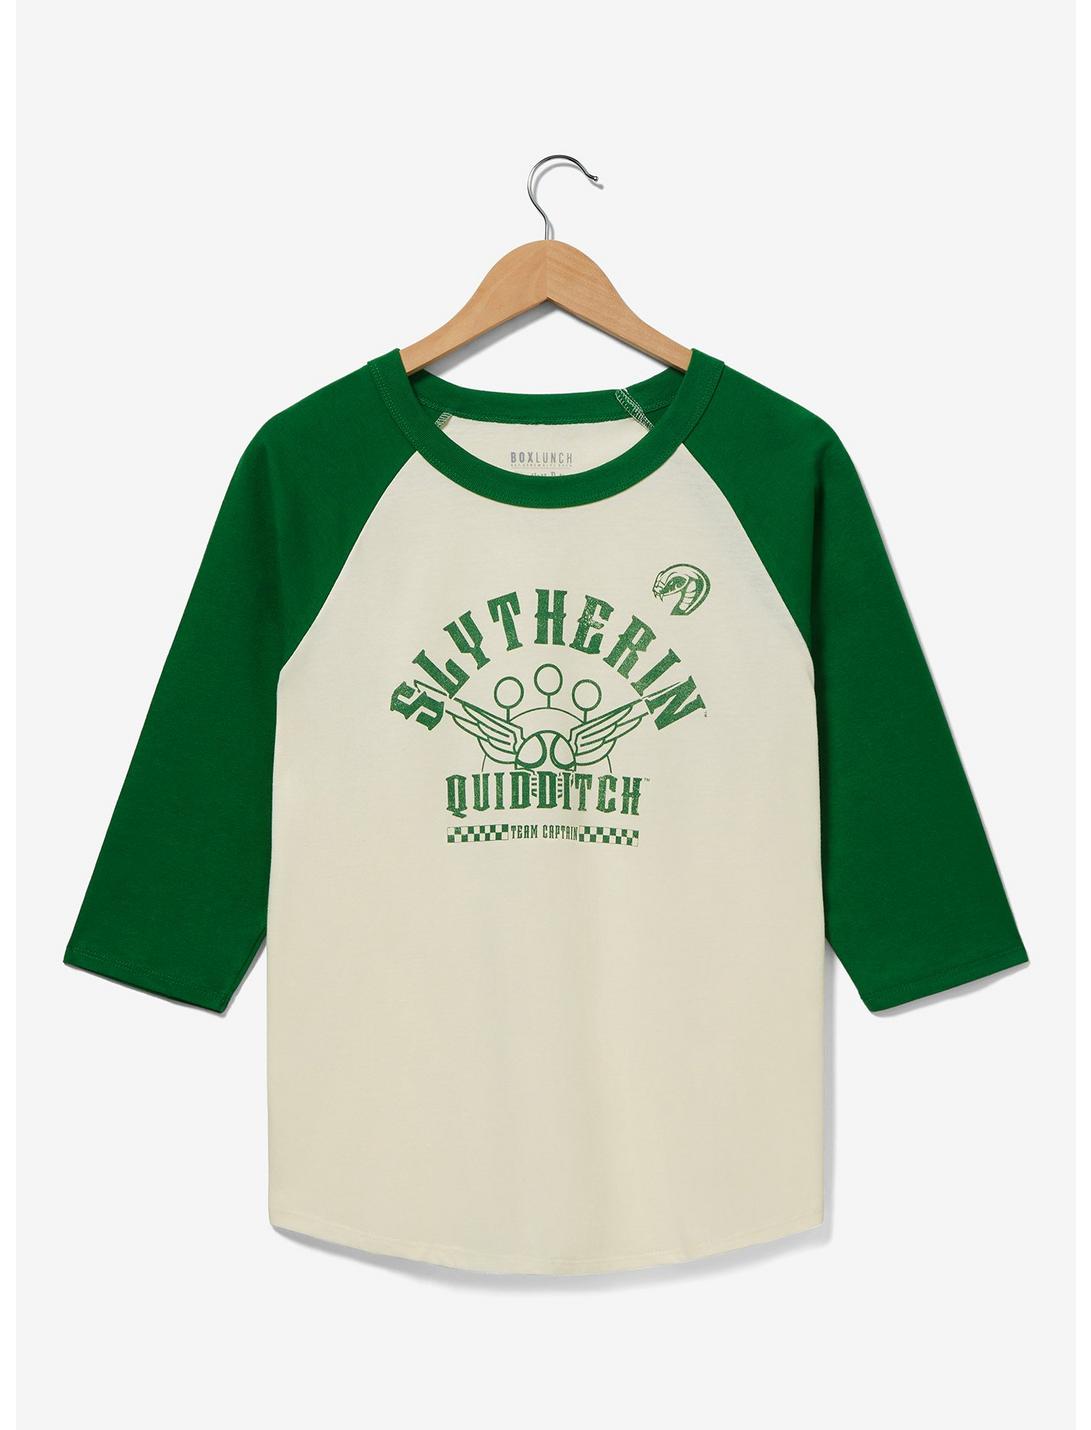 Harry Potter Slytherin Quidditch Raglan T-Shirt - BoxLunch Exclusive, MULTI, hi-res